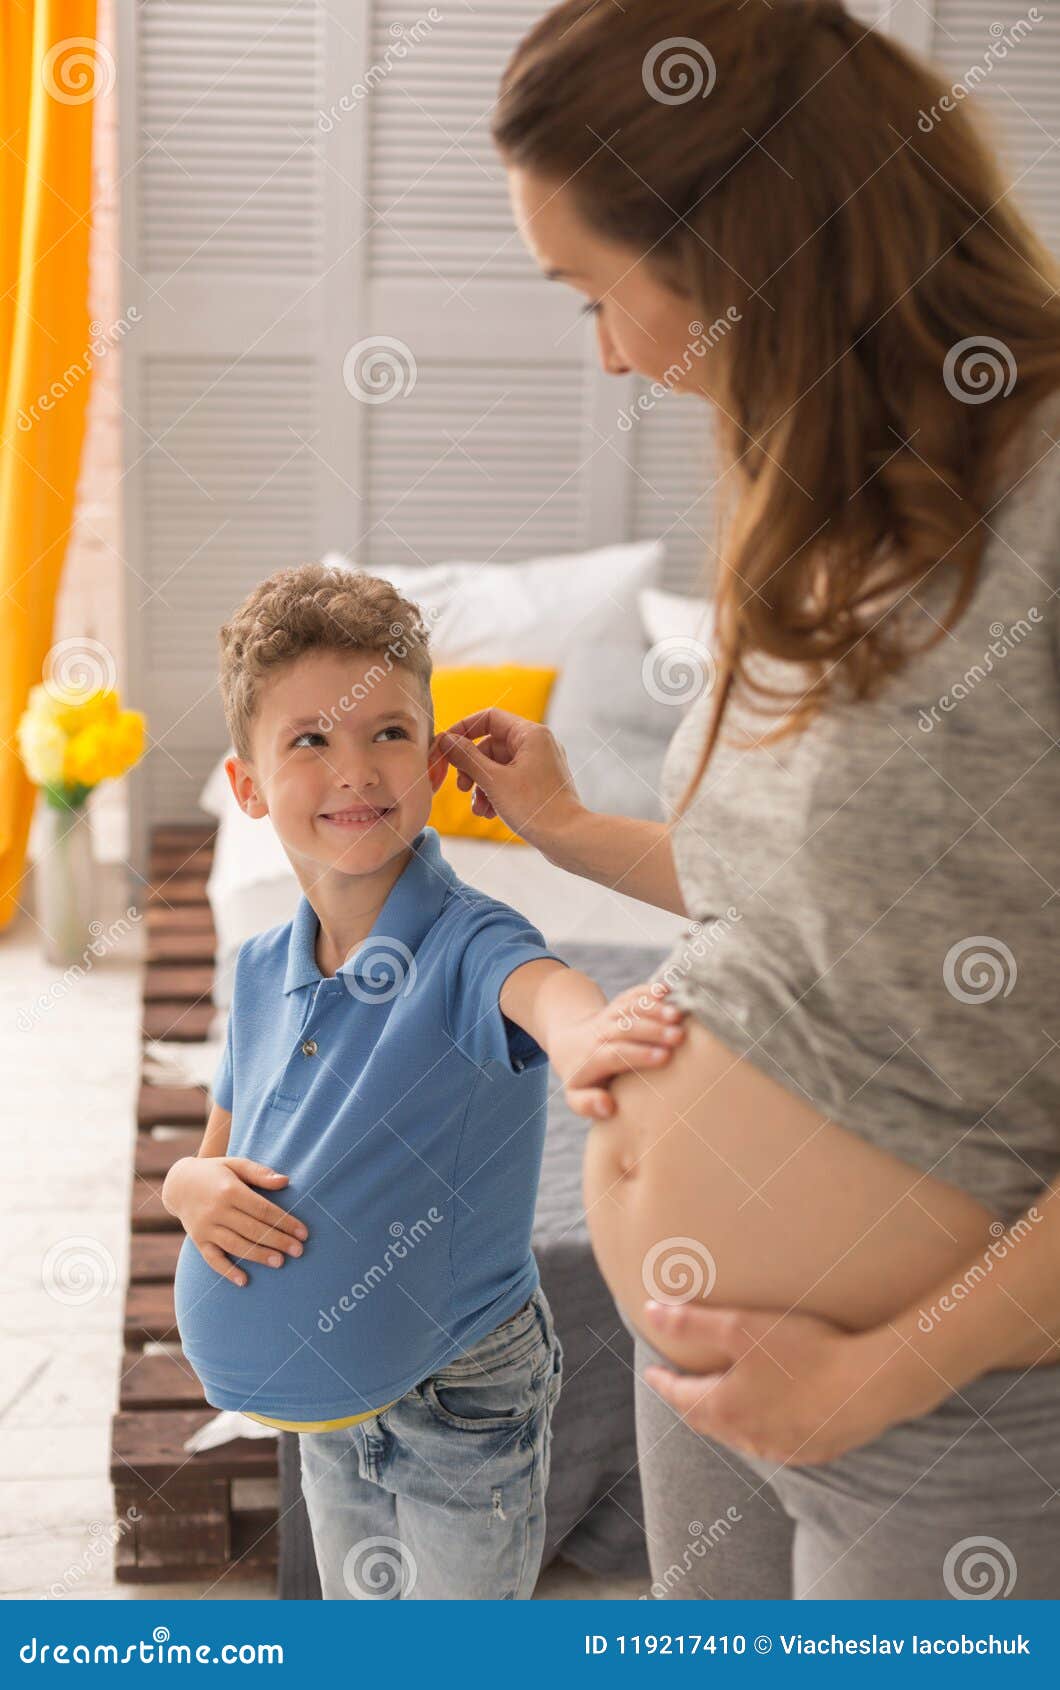 Pregnant Woman With Wavy Hair T